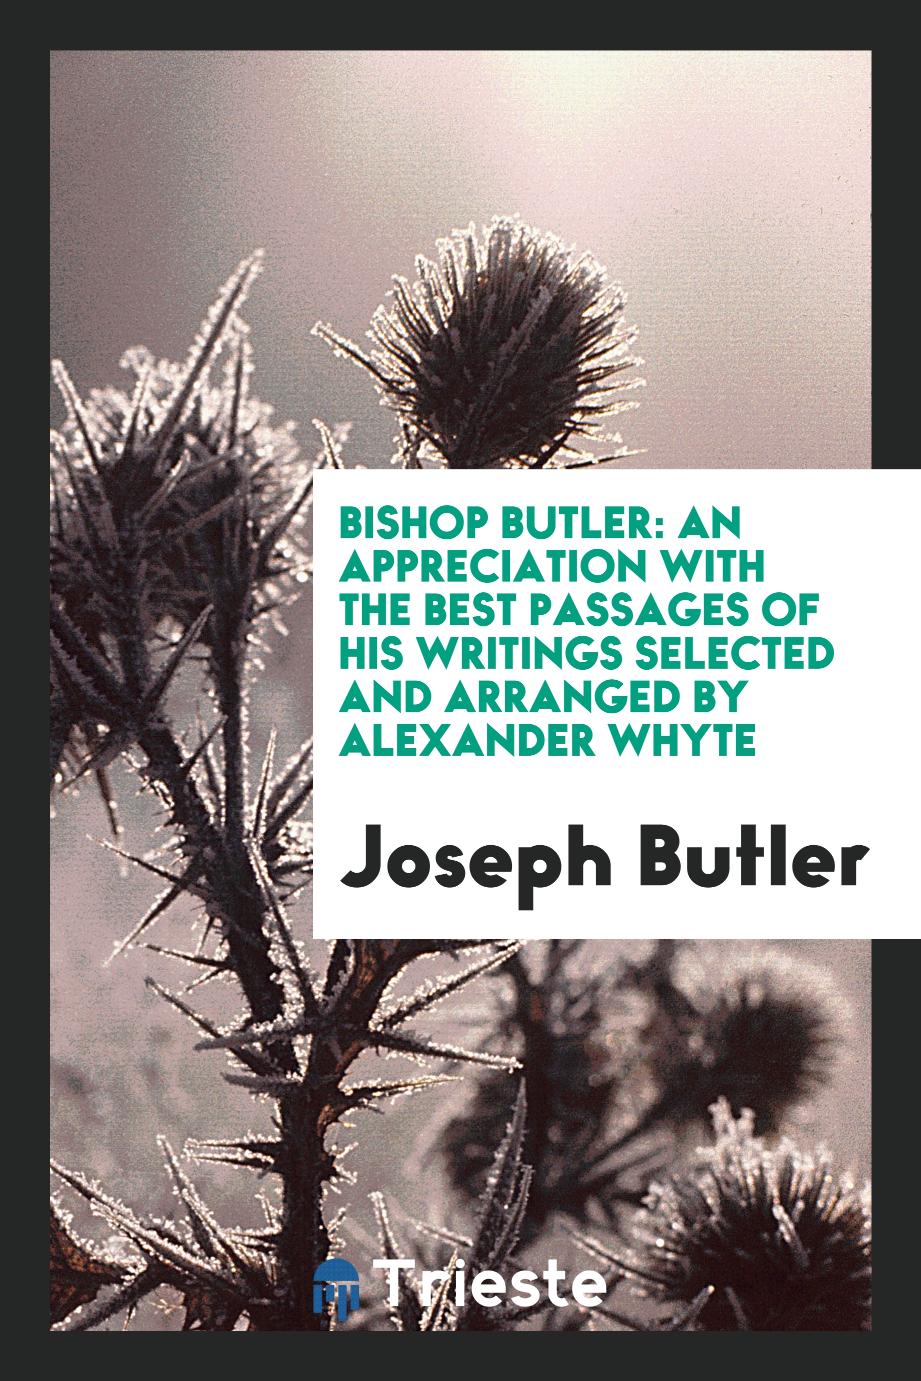 Bishop Butler: an appreciation with the best passages of his writings selected and arranged by Alexander Whyte